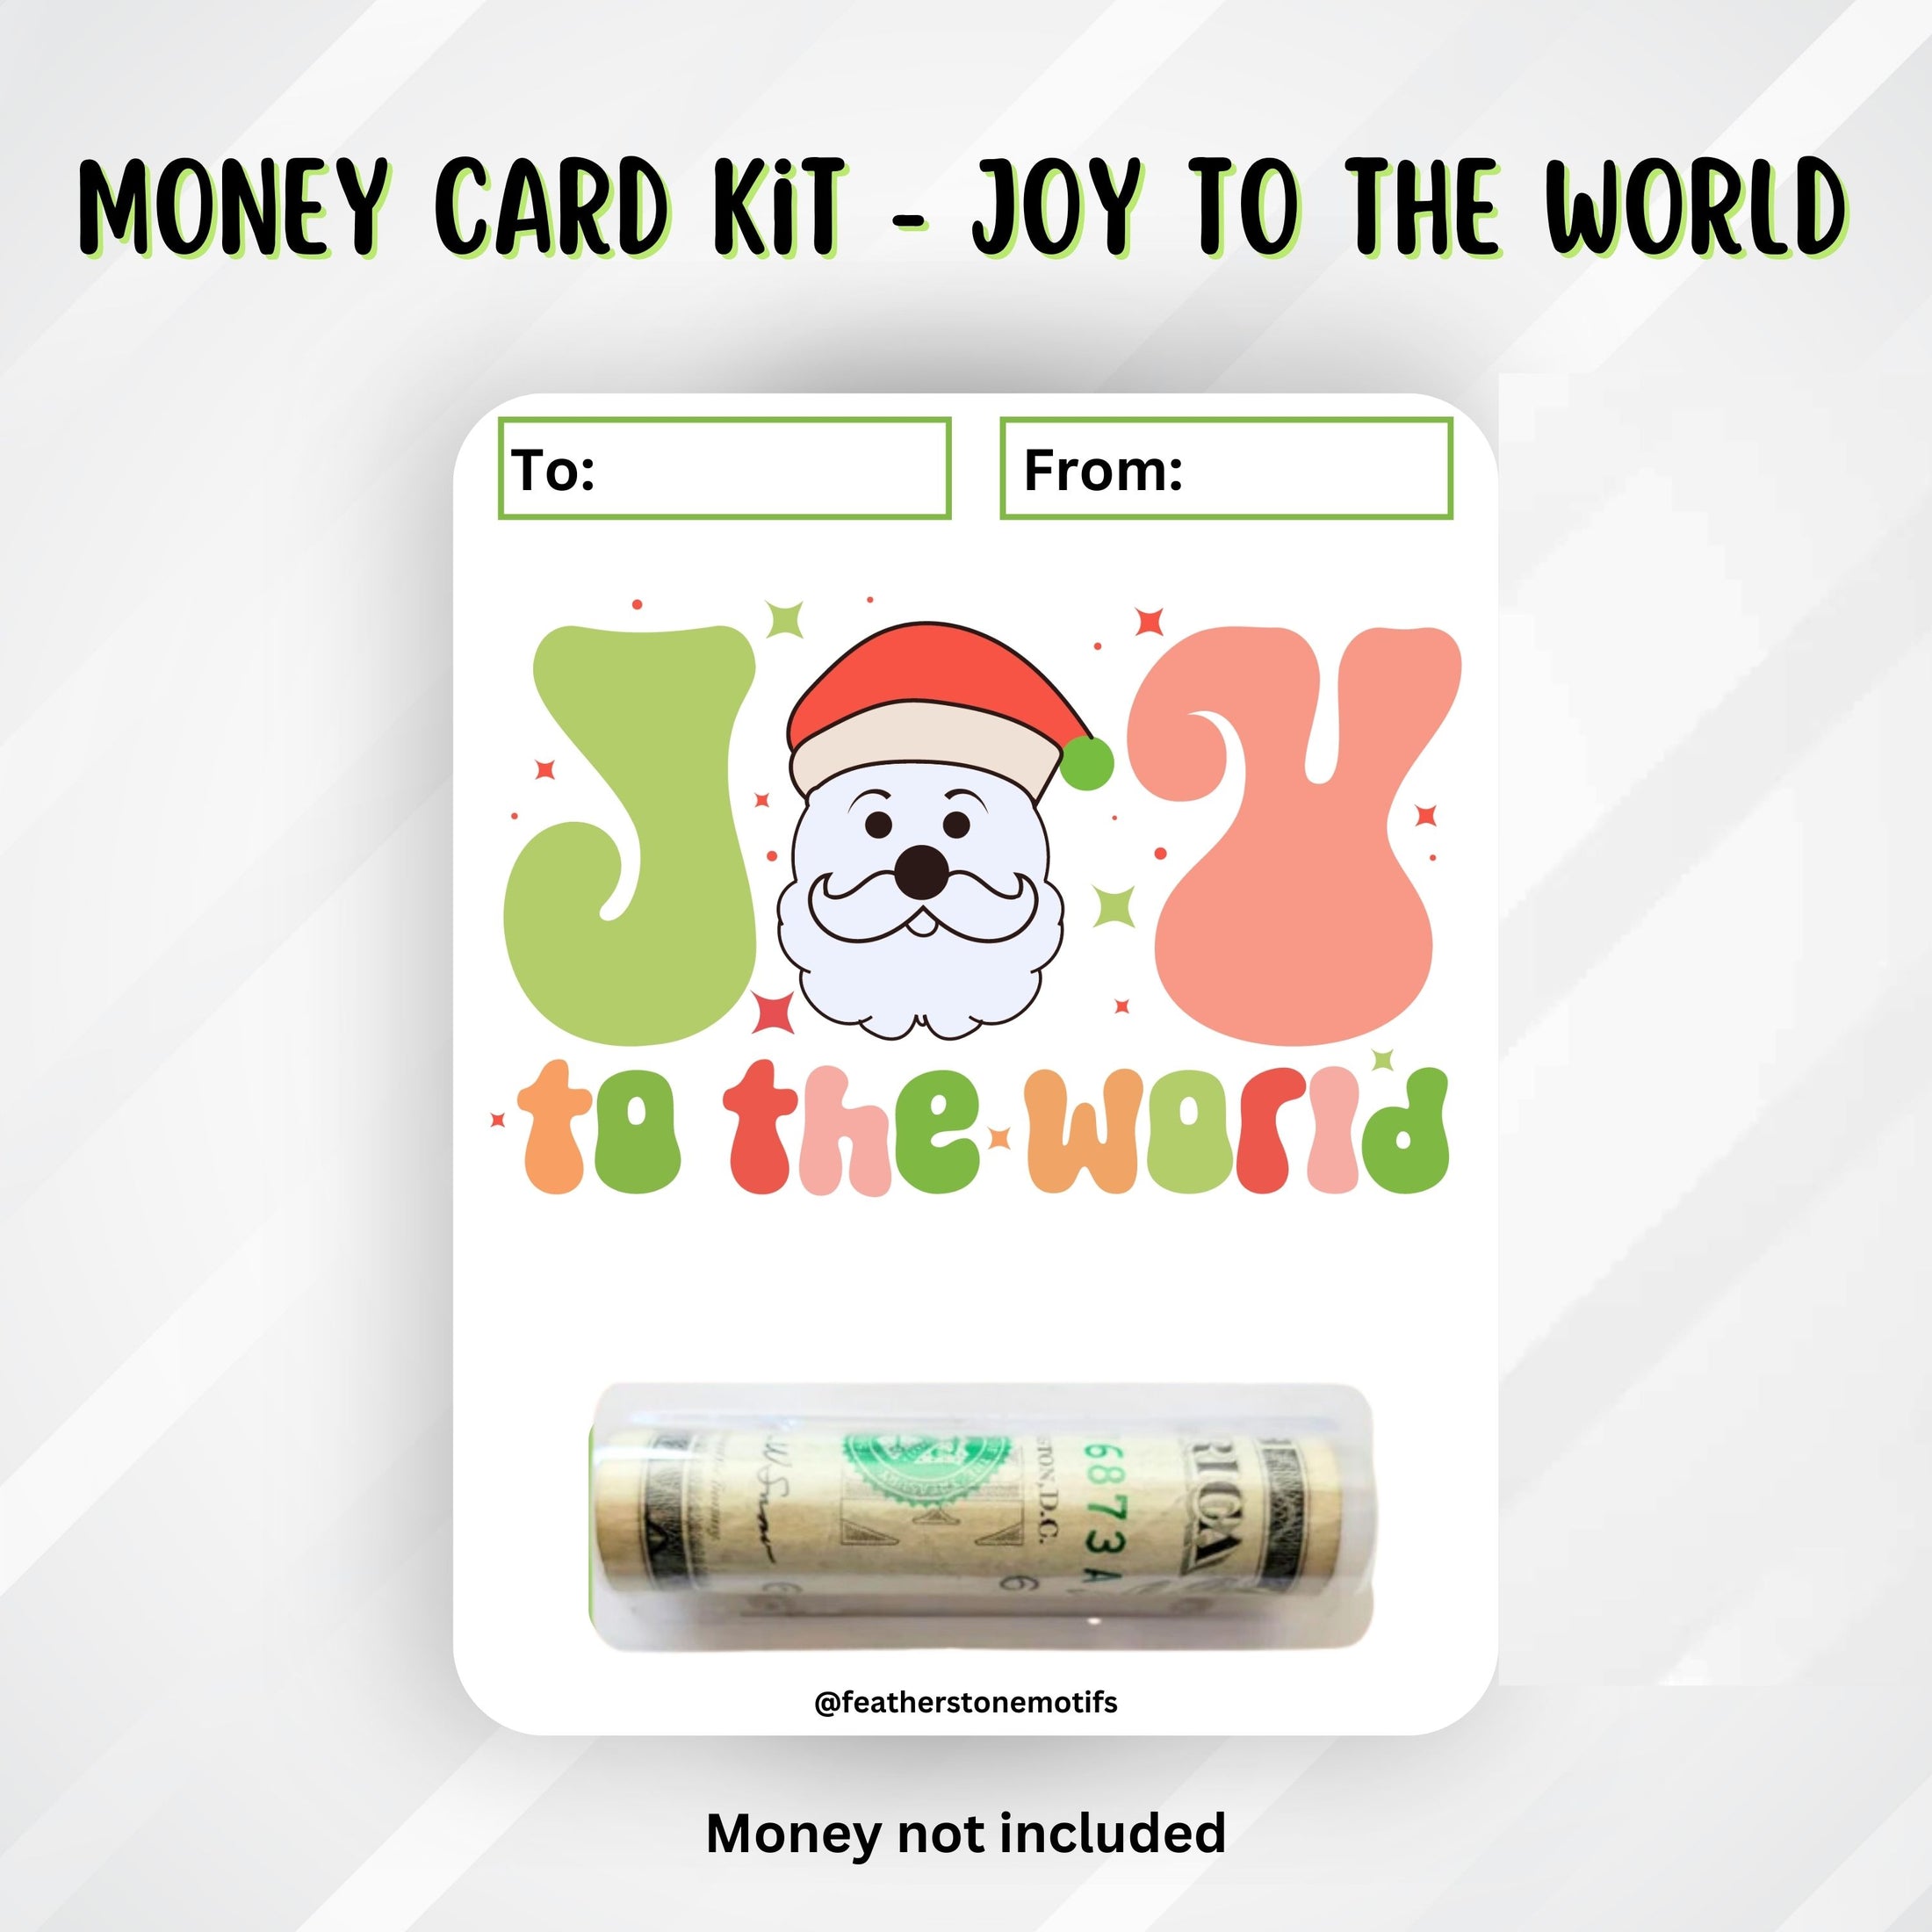 This image shows the money tube attached to the Joy to the World money card.